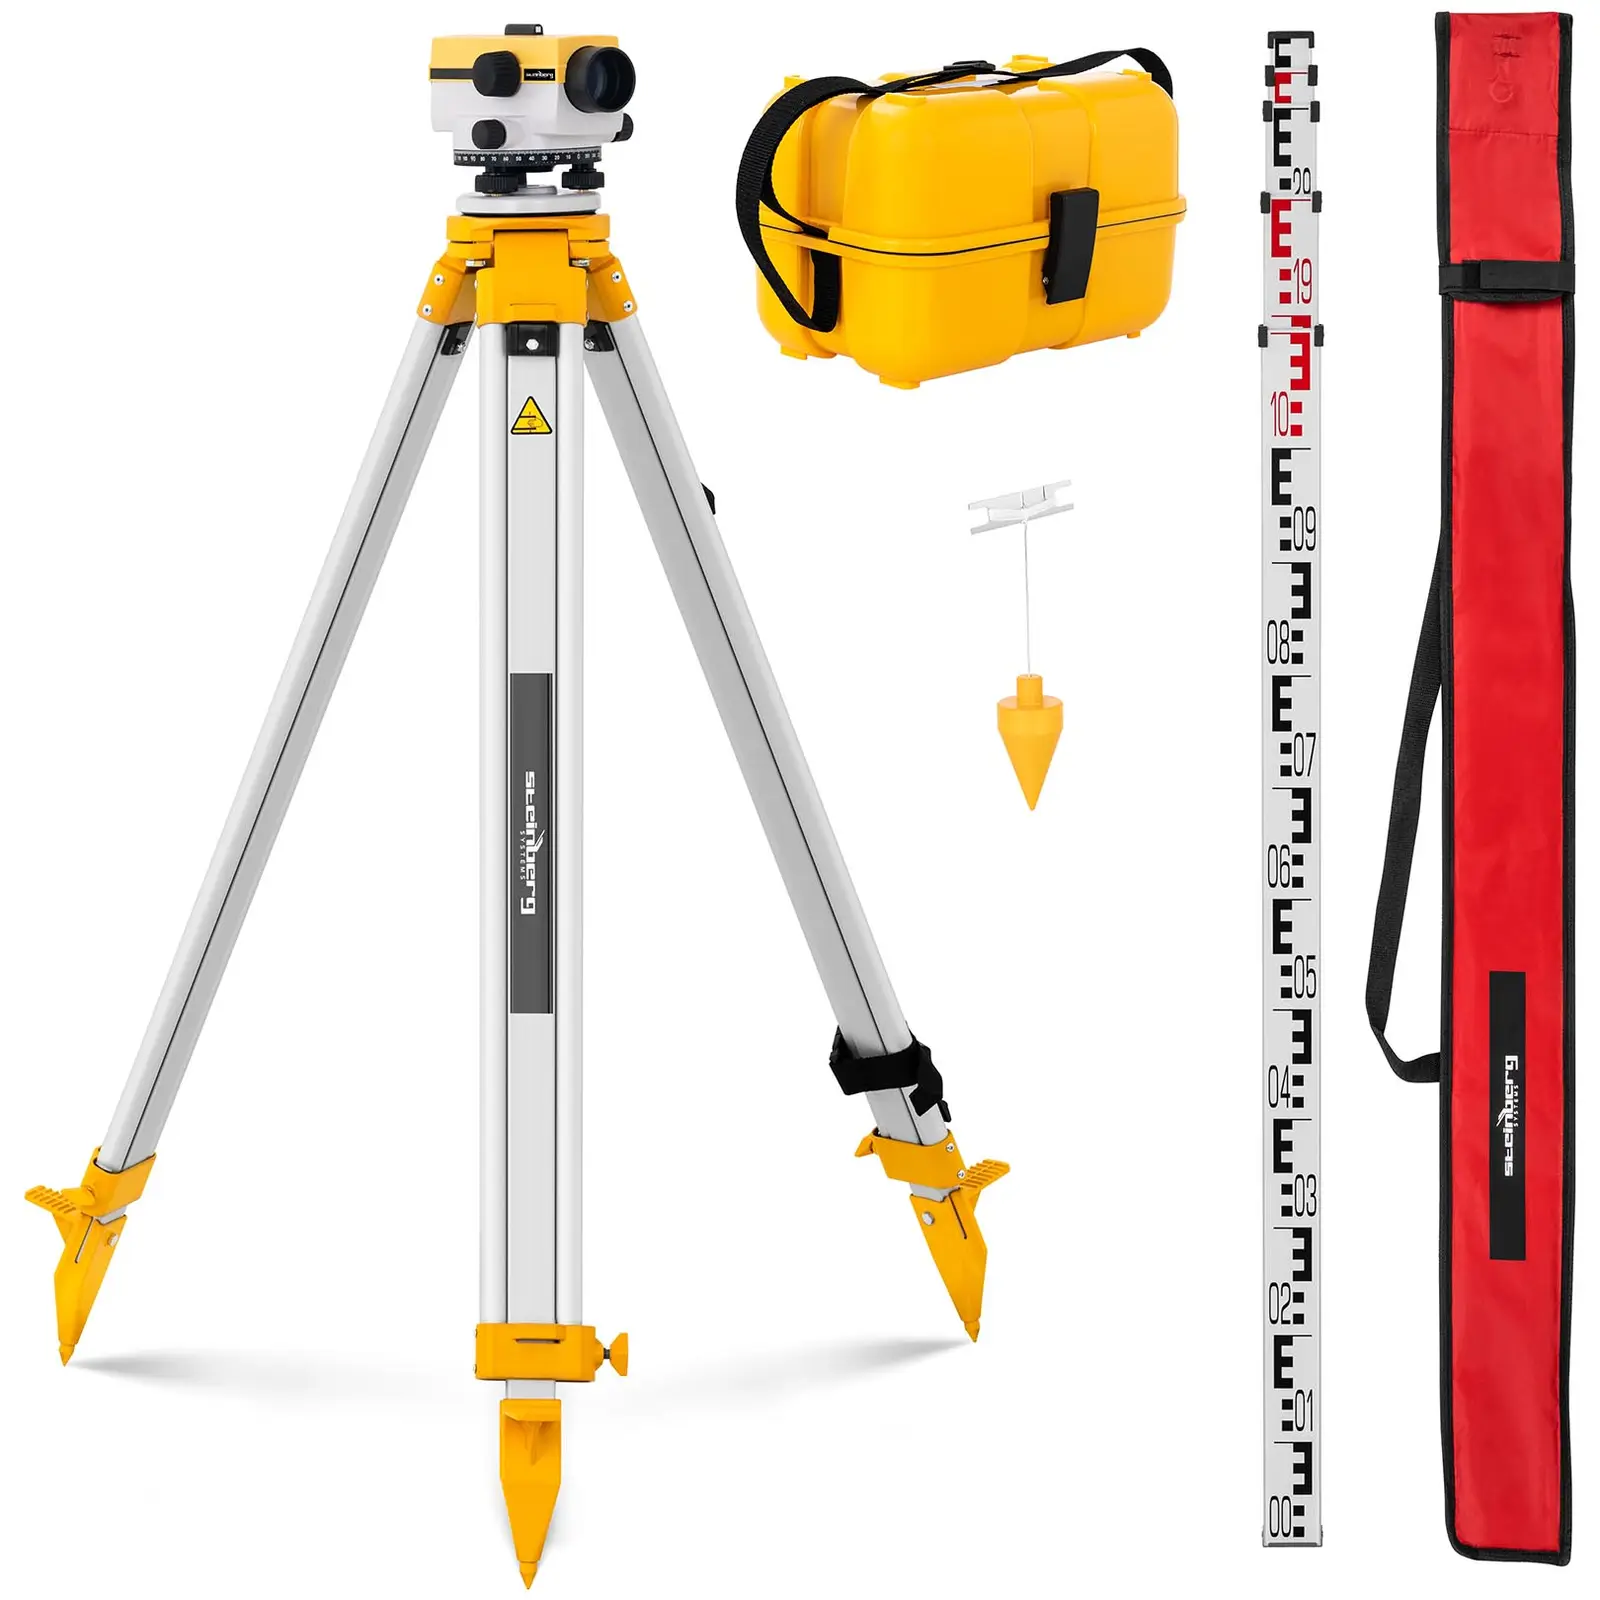 Automatic Level - with tripod and level staff - 24x magnification - 36 mm lens - deviation 2 mm - air damped compensator